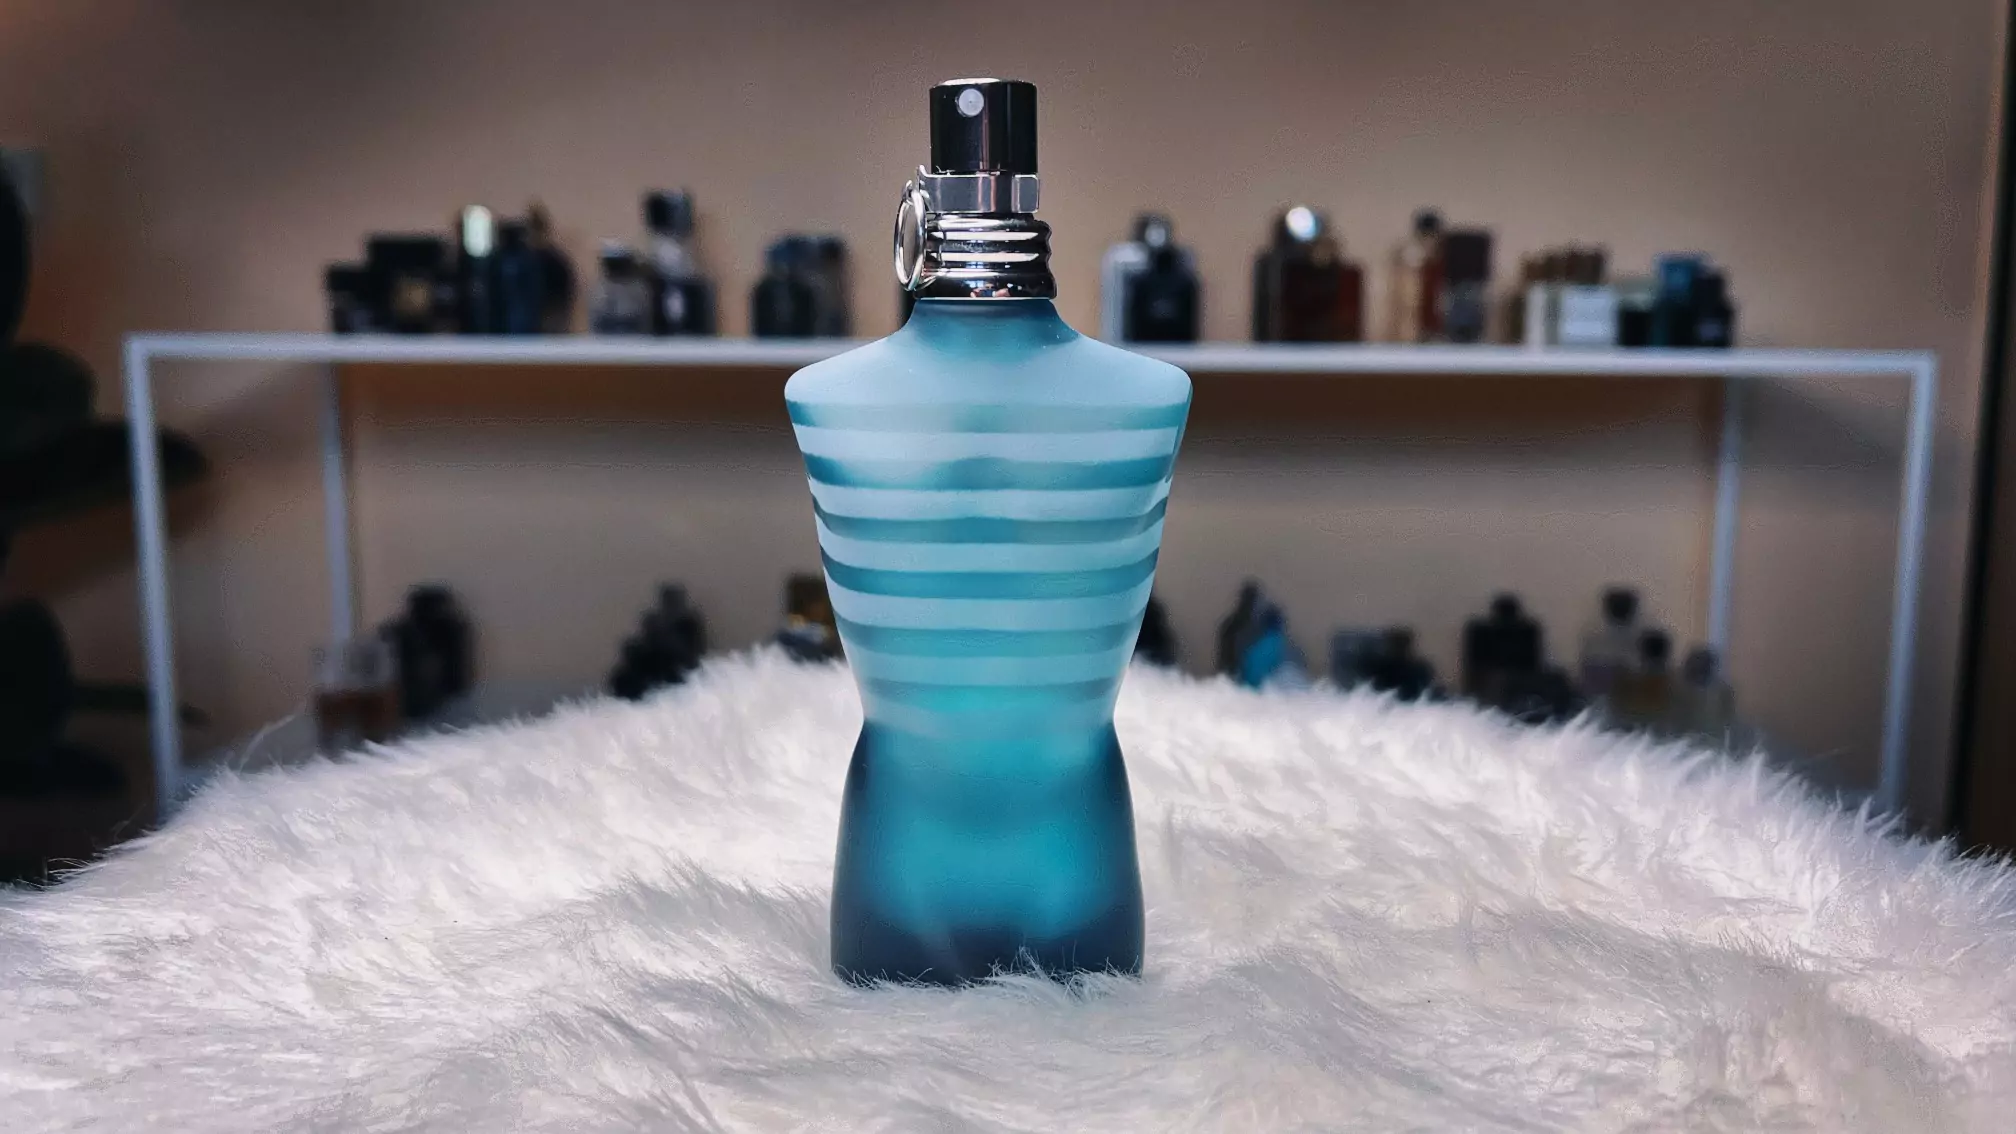 DON'T BUY This Fragrance Before Watching This!  Jean Paul Gaultier Le Male  Le Parfum 